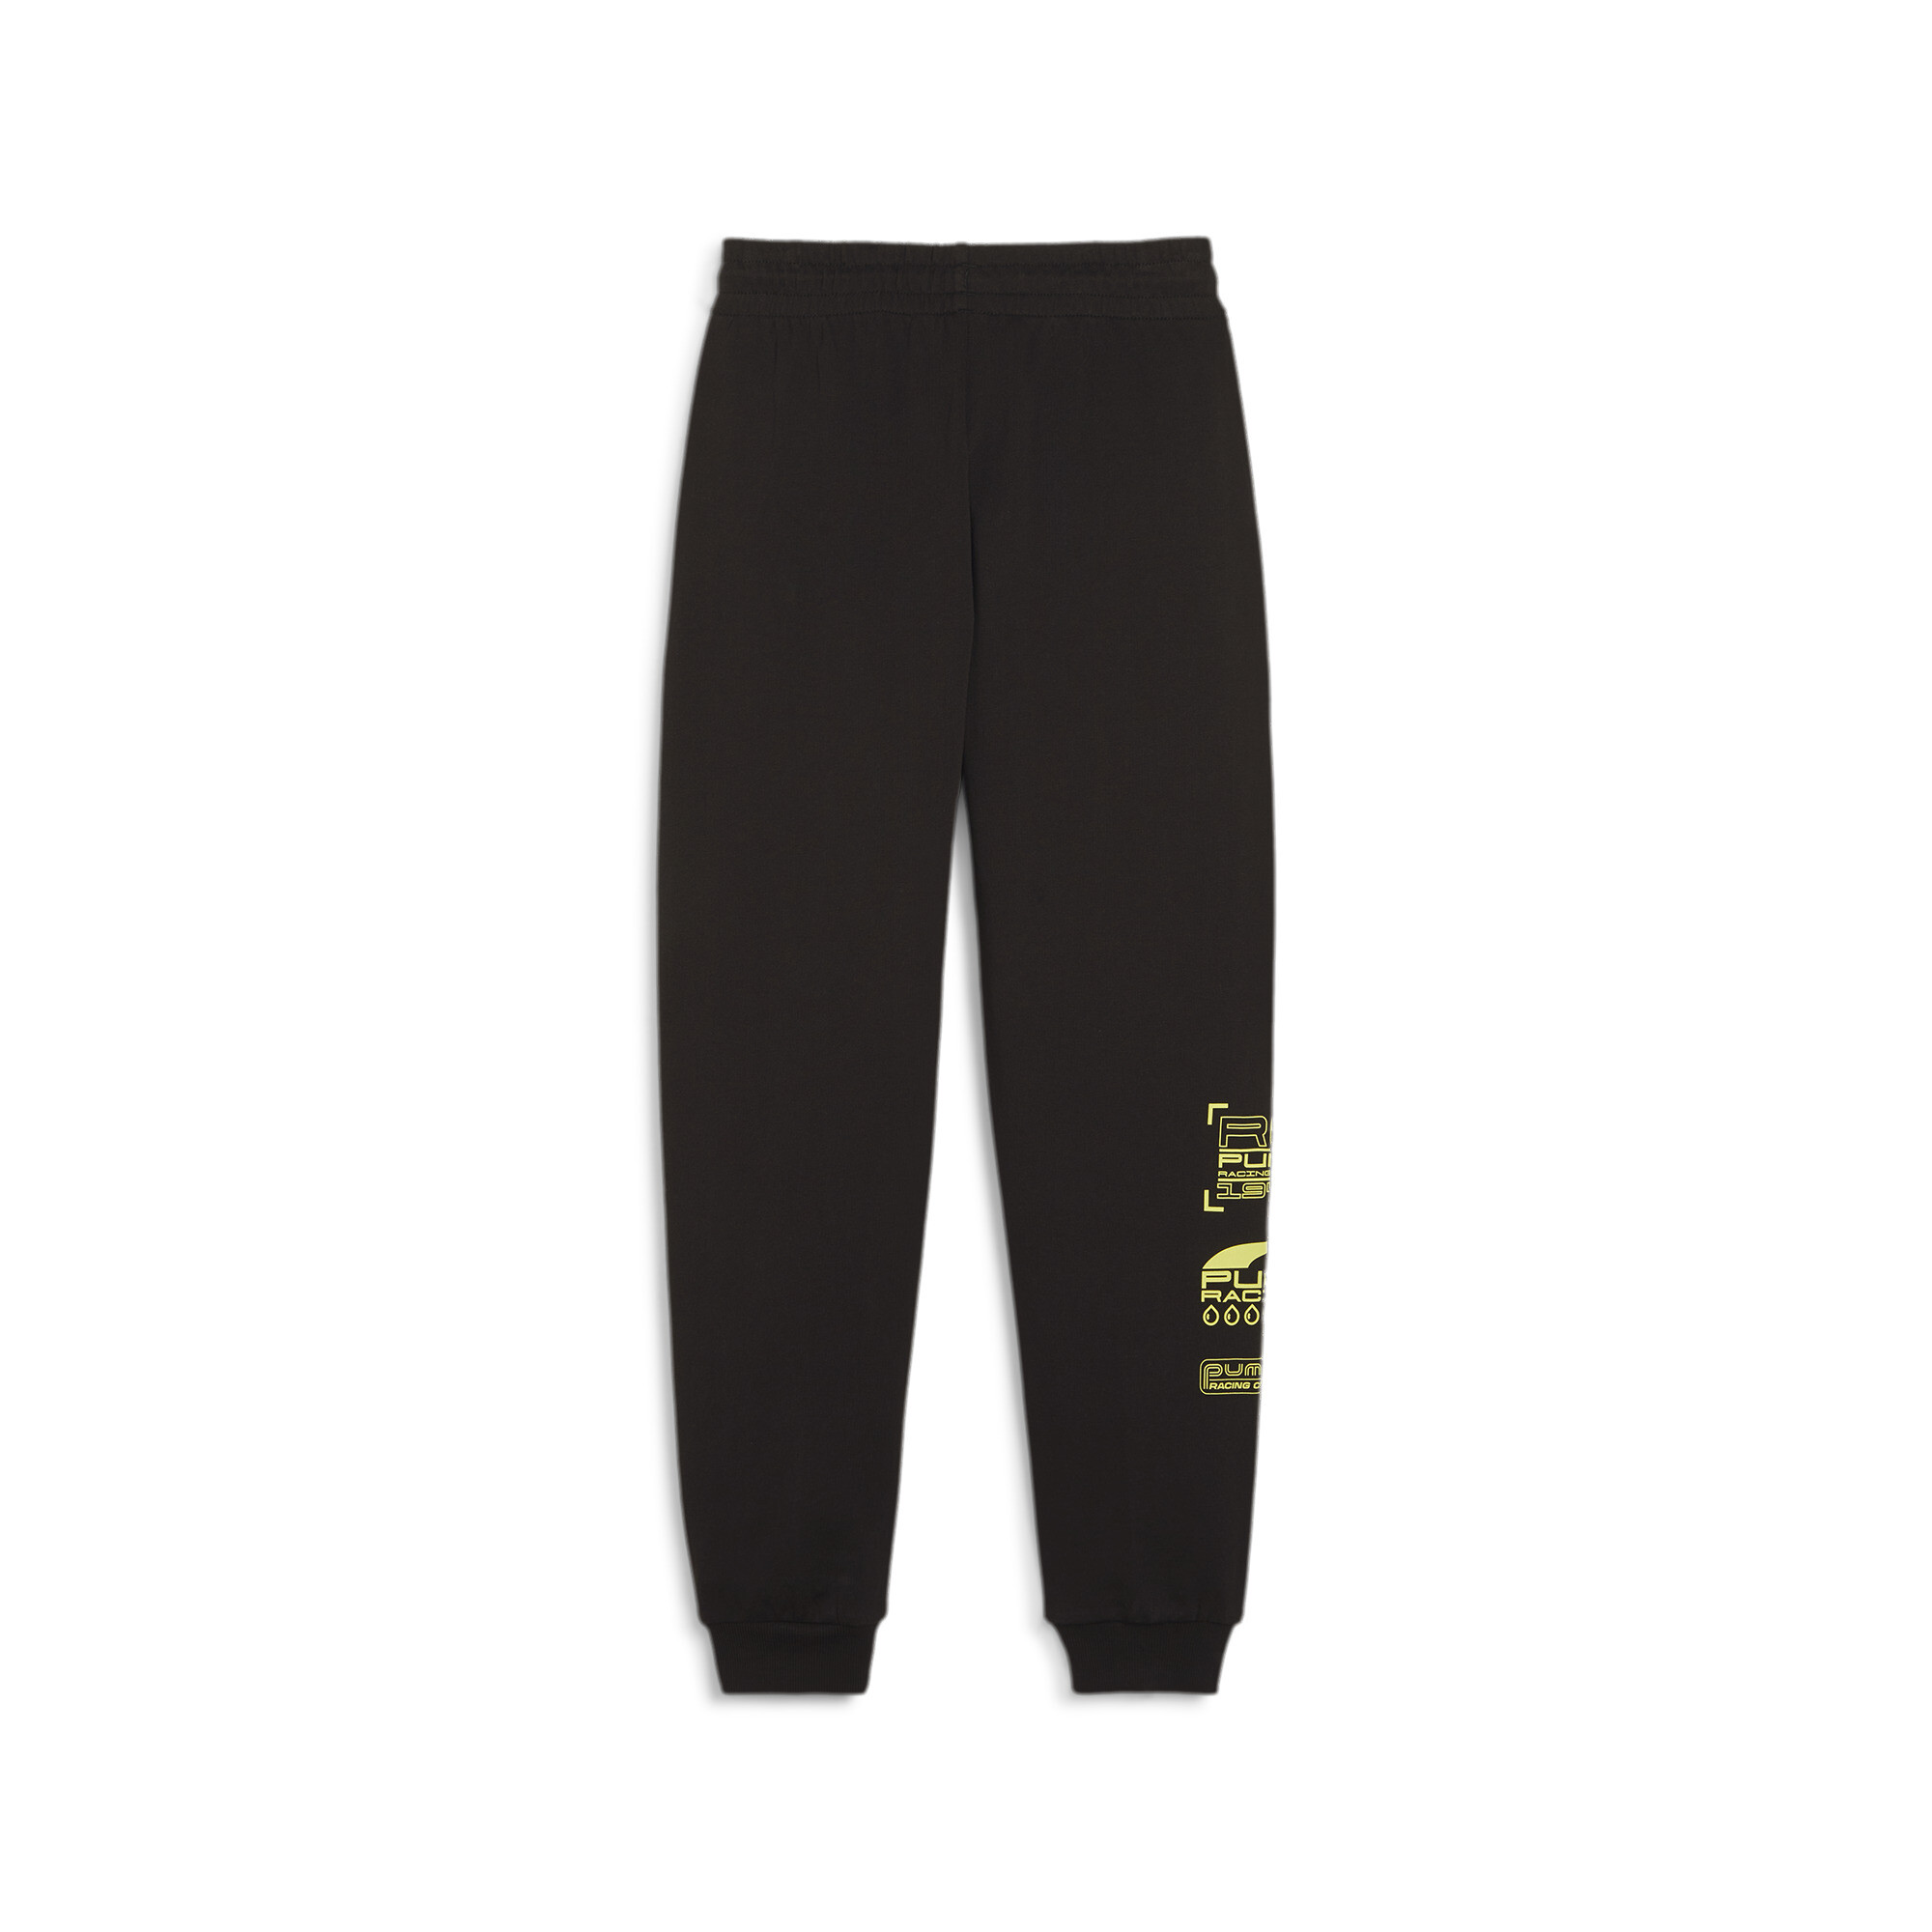 PUMA CLASSICS XCNTRY BKR Pants In Black, Size 15-16 Youth